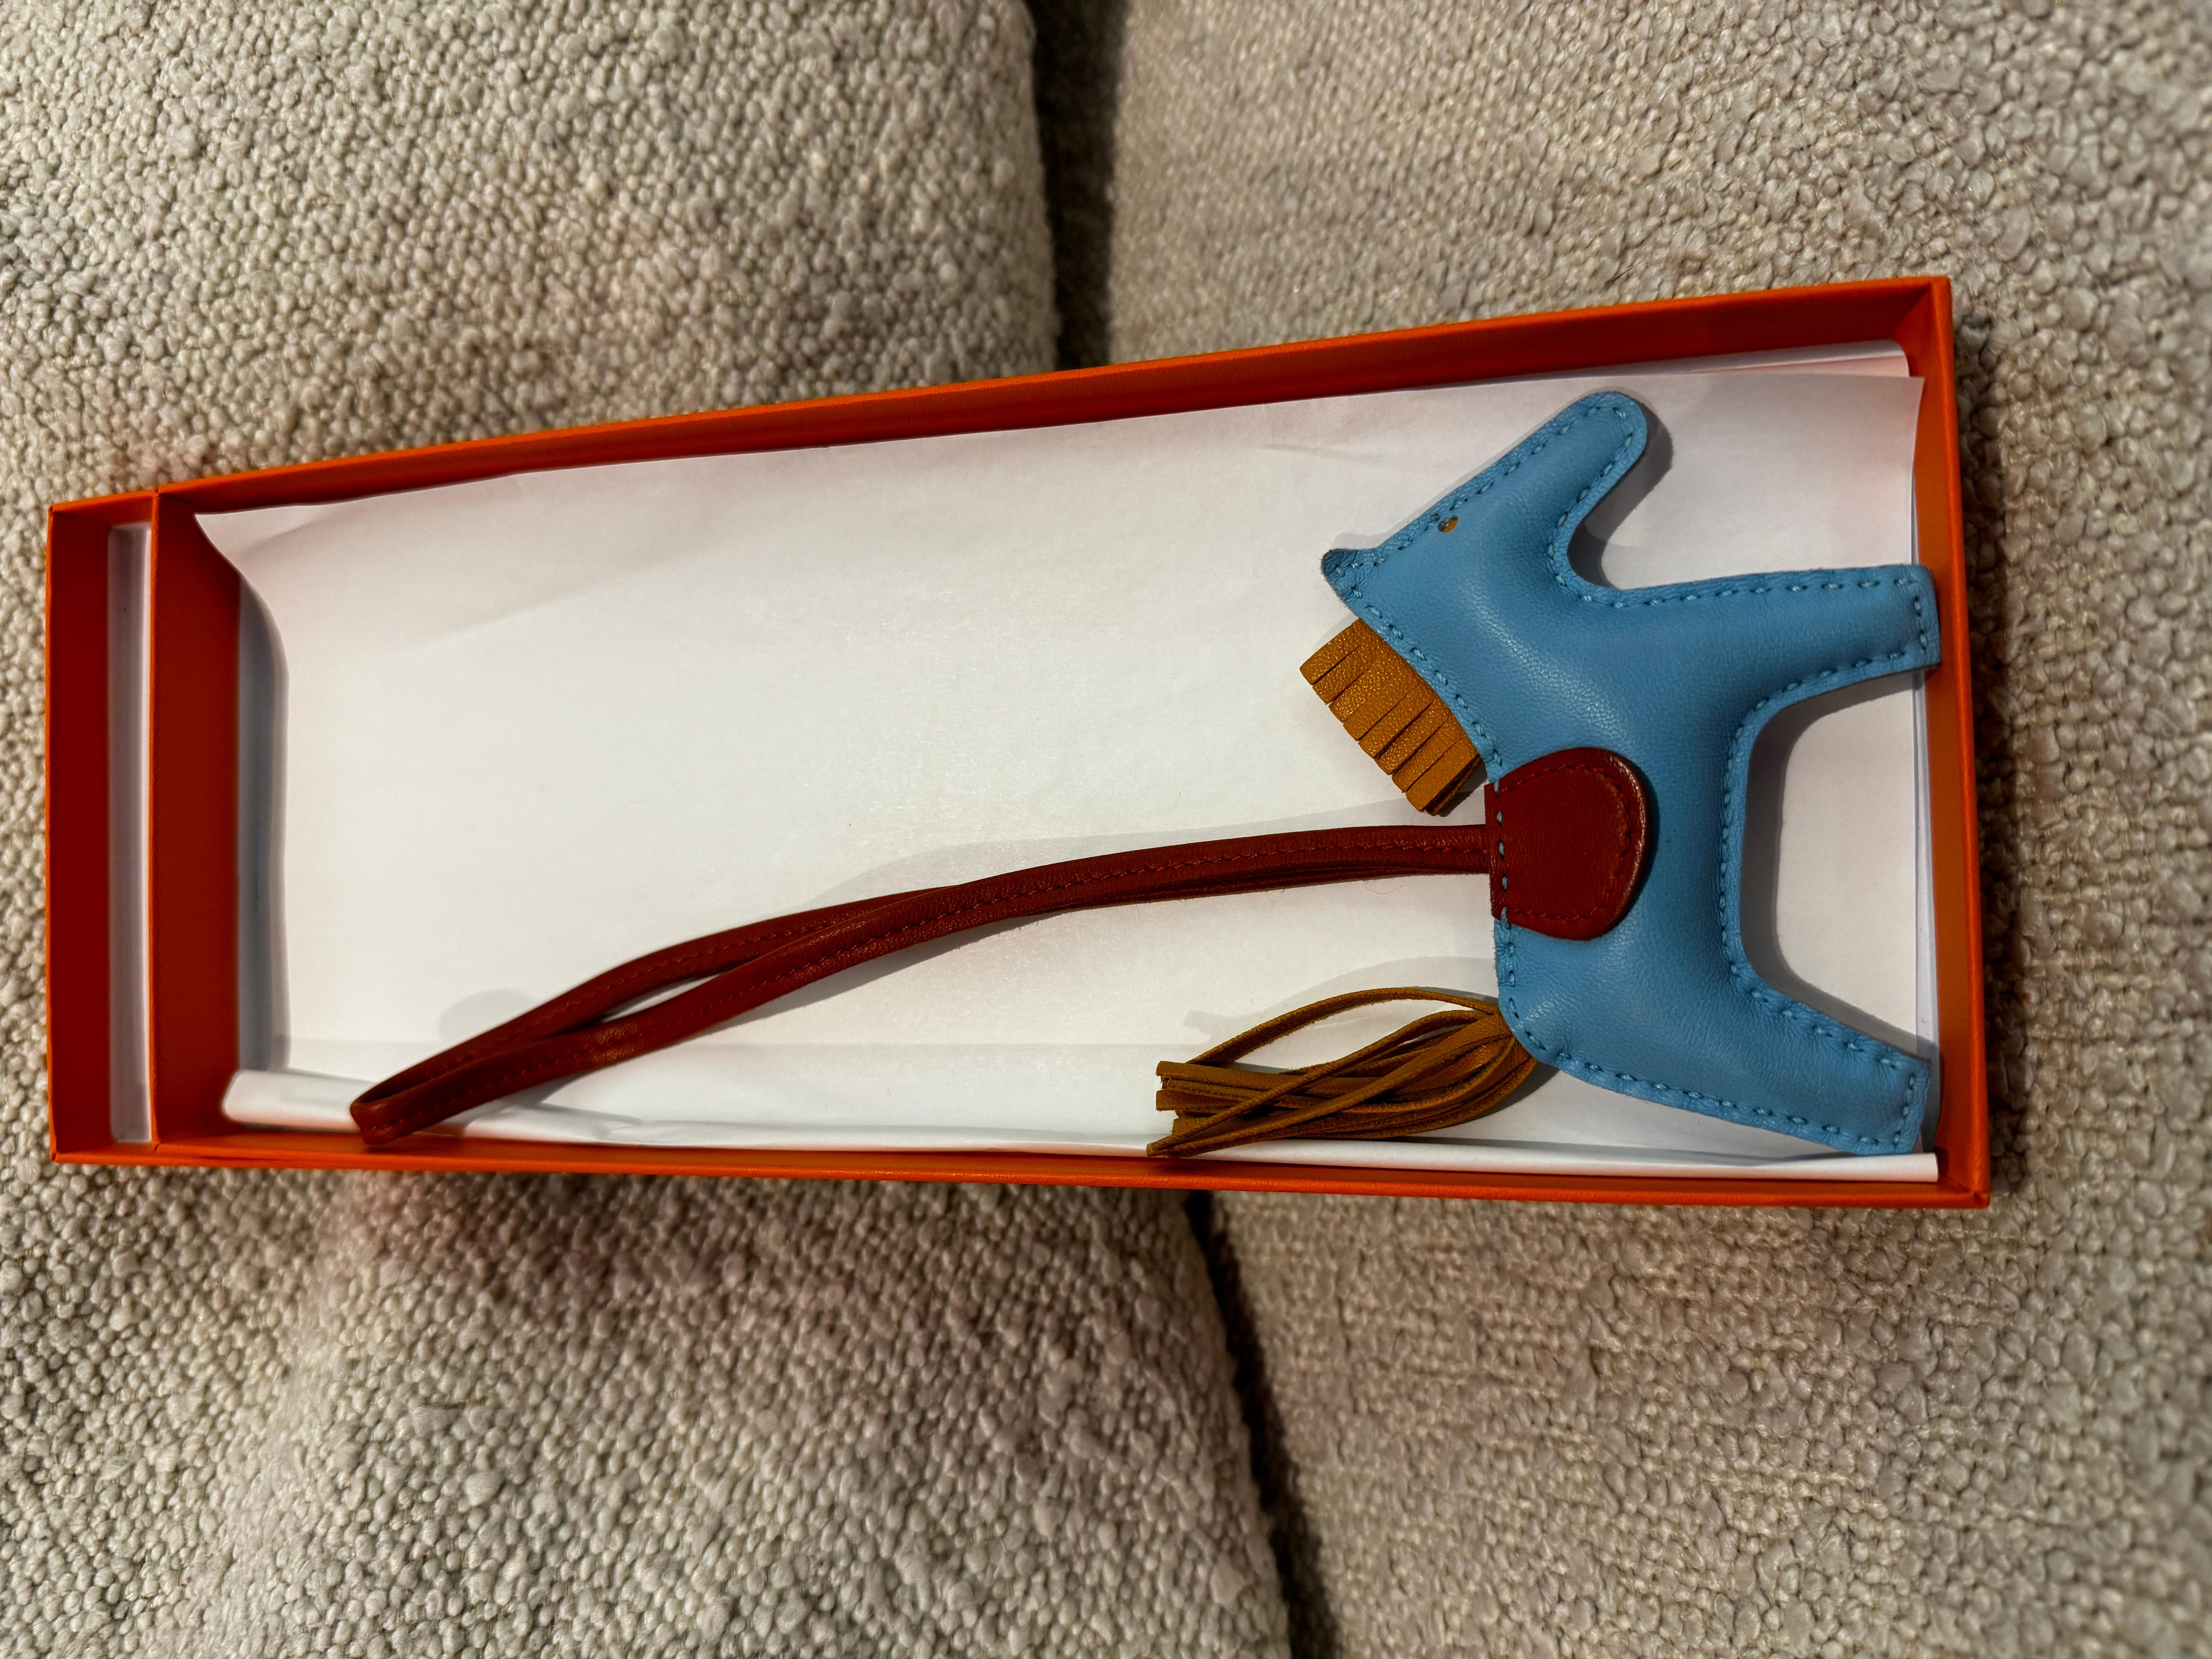 HERMES Milo Lambskin Horsehair Grigri Rodeo Horse Bag Charm PM in Celeste, Naturel Bouton D'Or and Cornaline. So rare, some rodeo are more appreciated than the Hermes Birkin/kelly bags. This lovely bag charm is crafted of stuffed blue lambskin